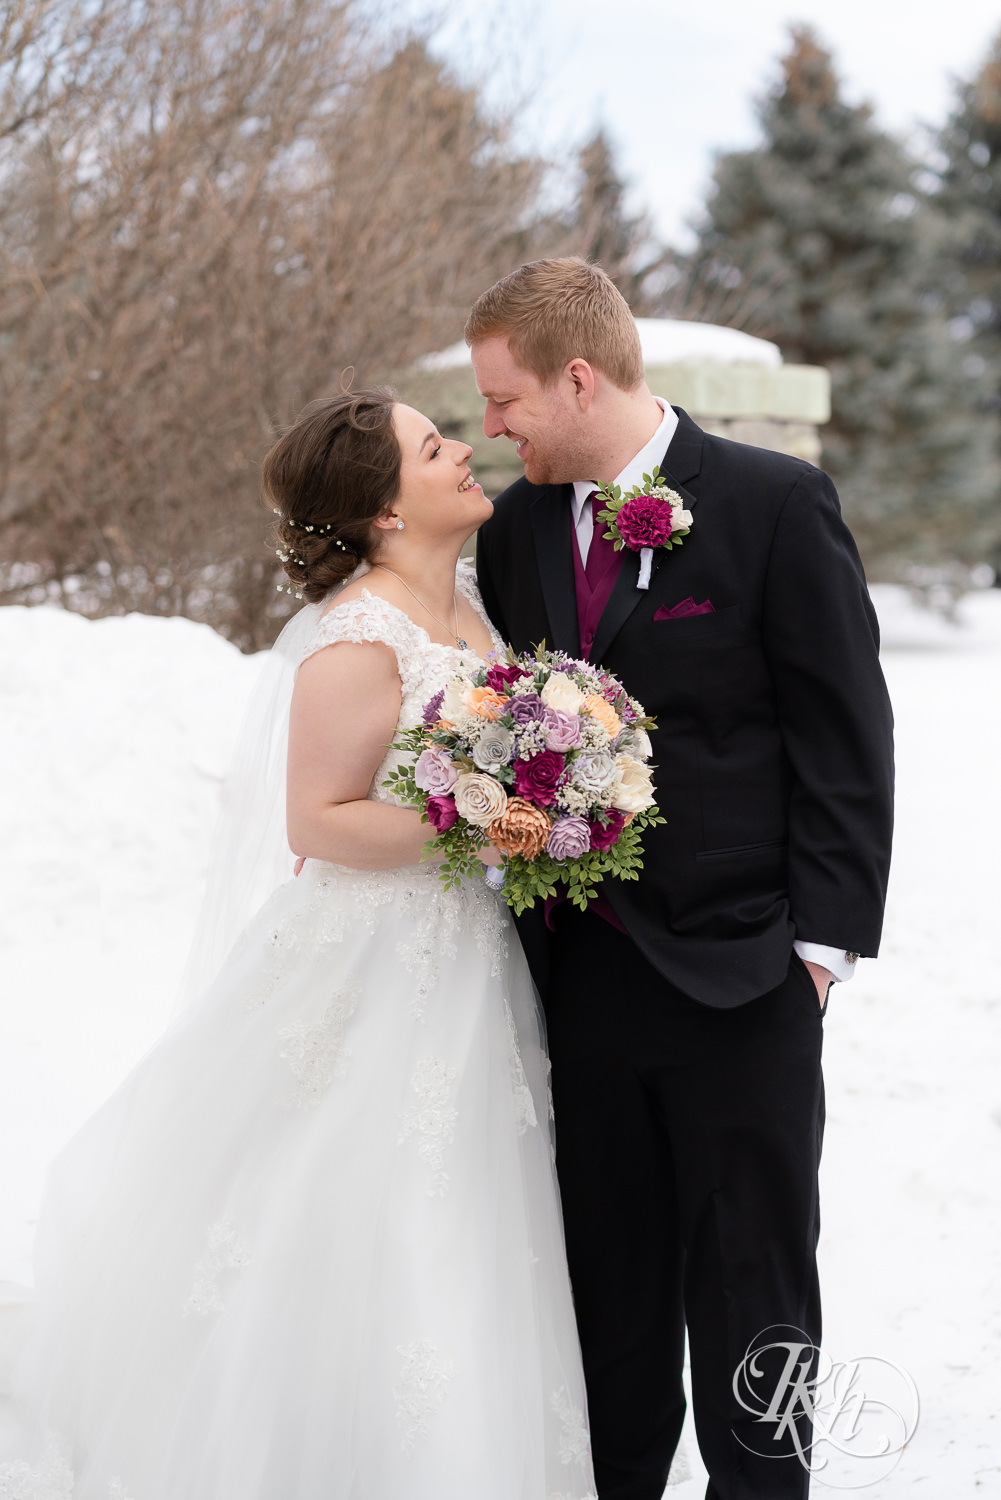 Bride and groom smiling in the snow at Glenhaven Events in Farmington, Minnesota.